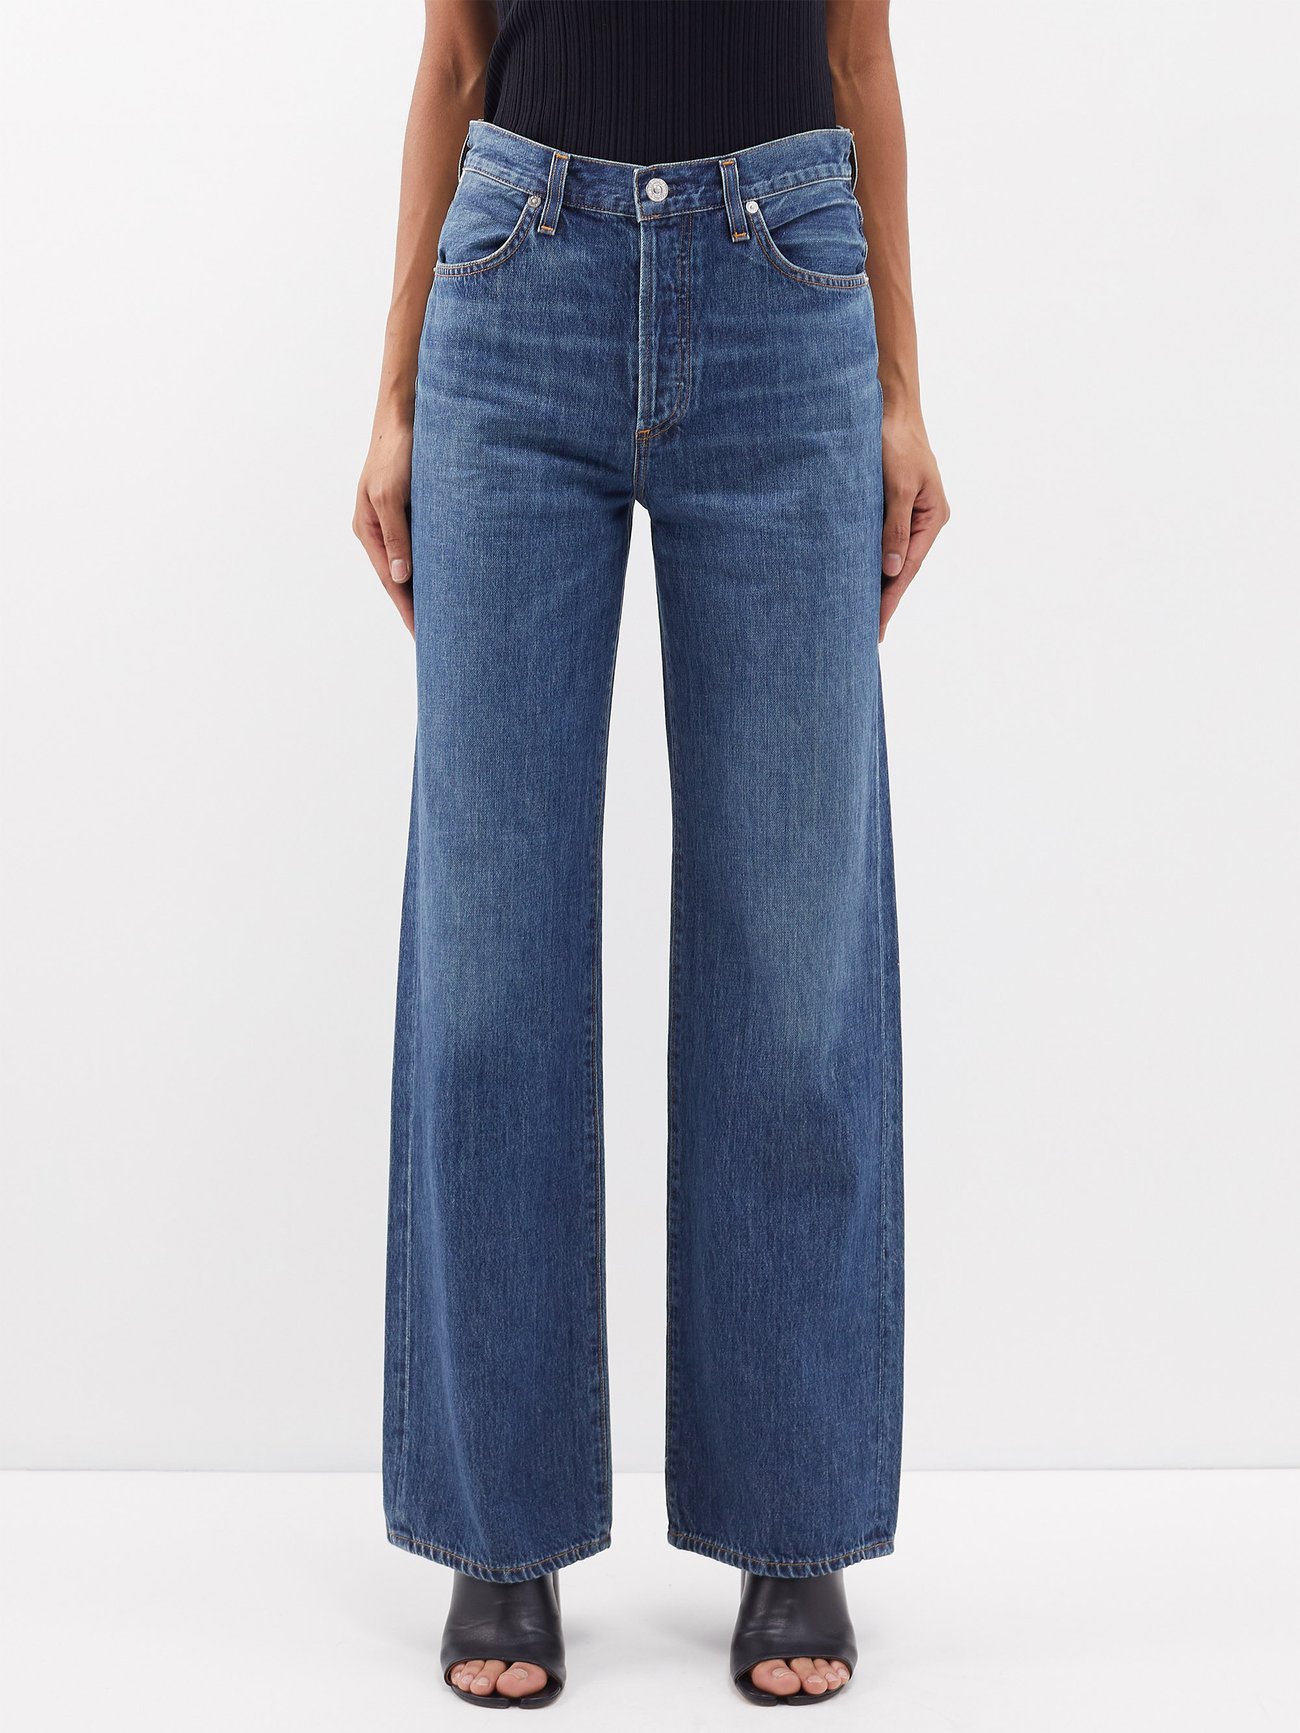 CITIZENS OF HUMANITY
Annina organic-cotton wide-leg jeans